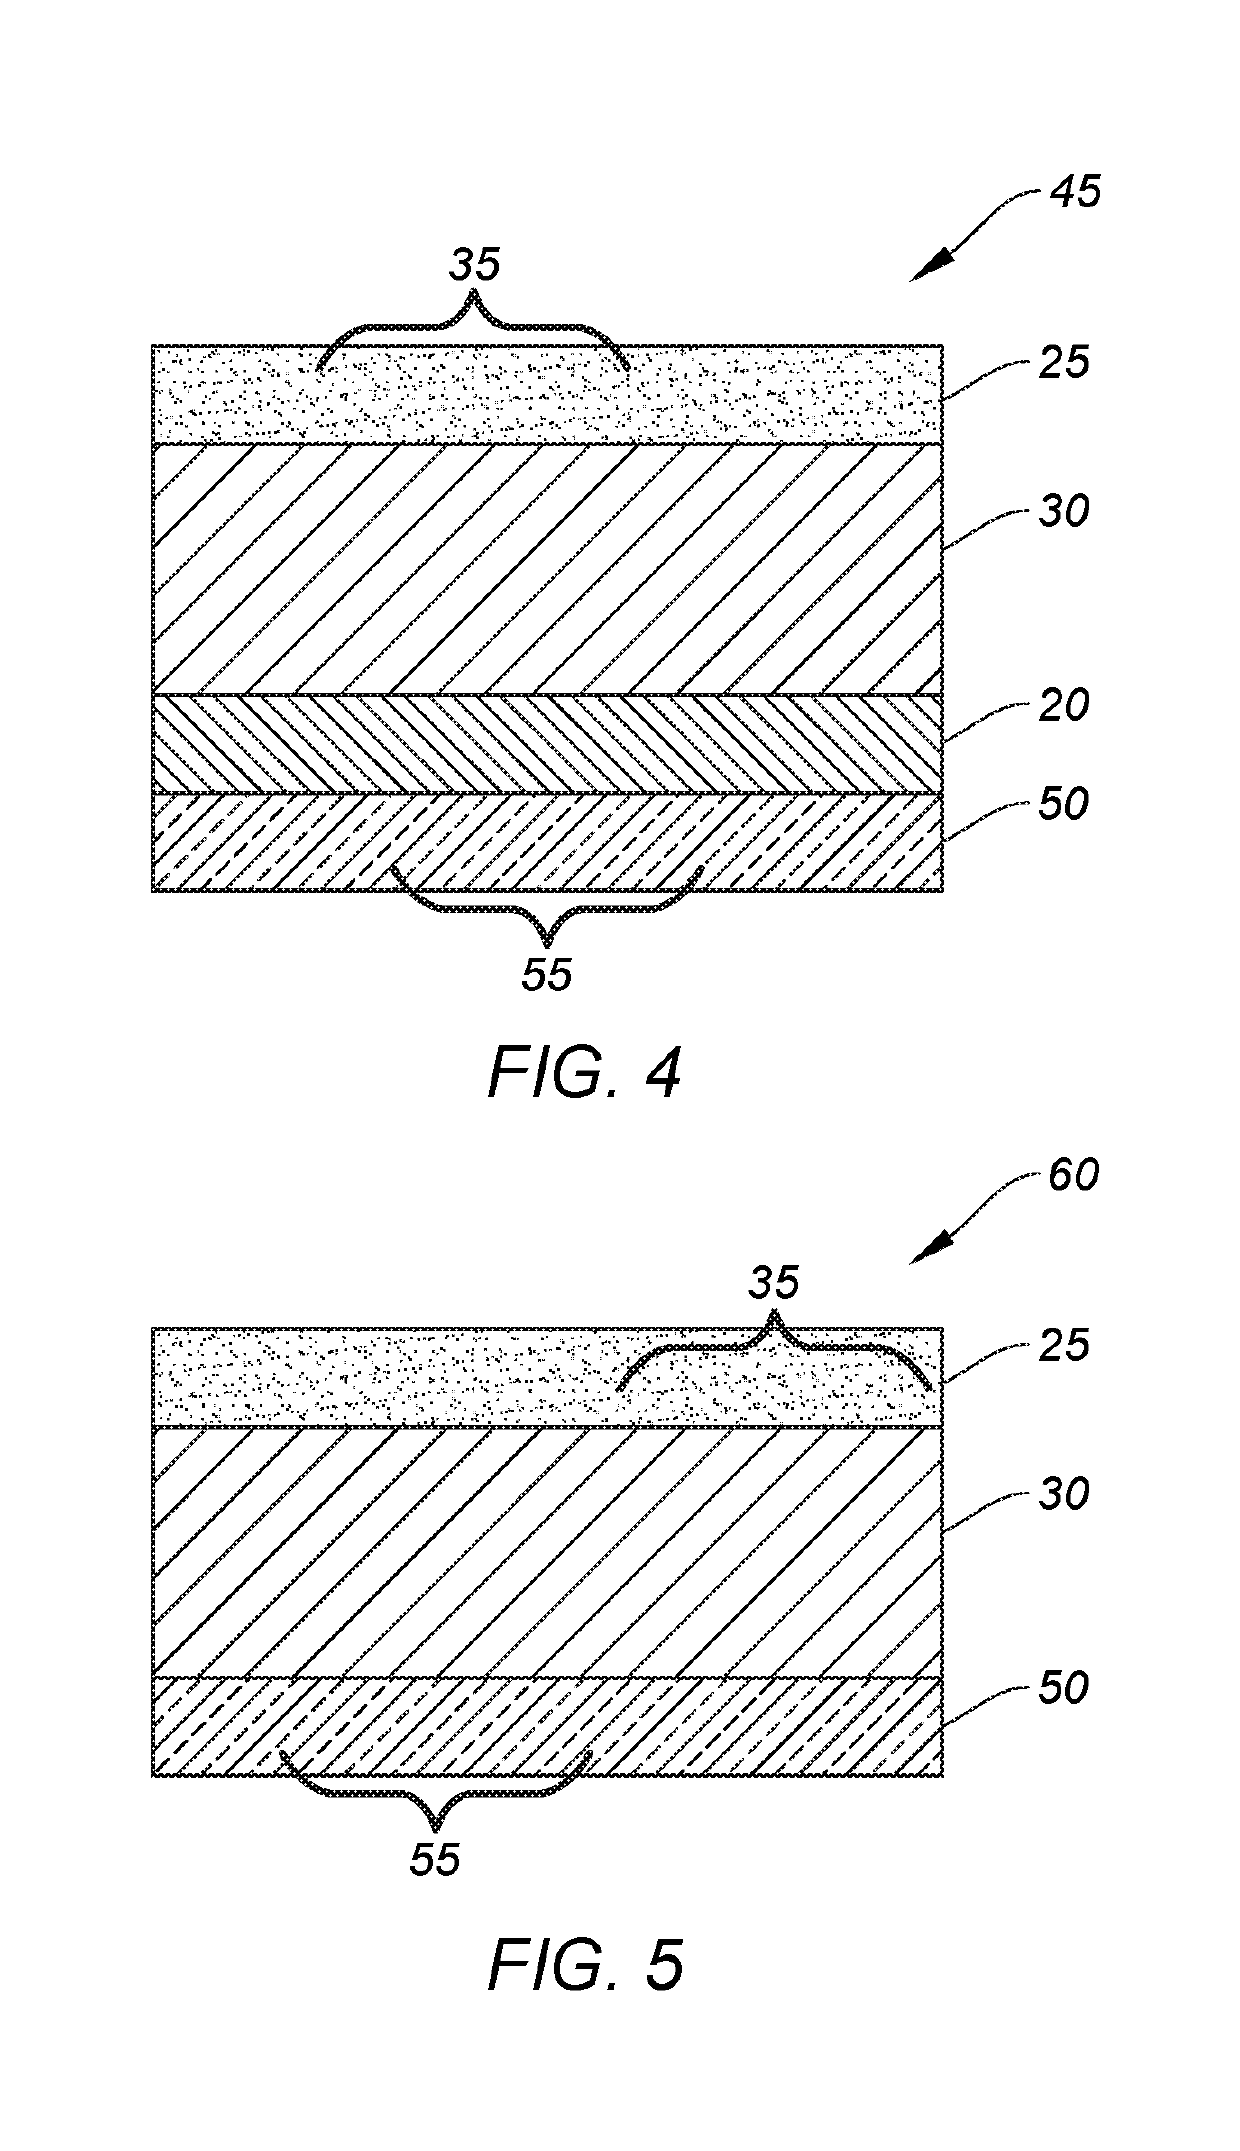 Kinetic piezoelectric capacitor with co-planar patterned electrodes